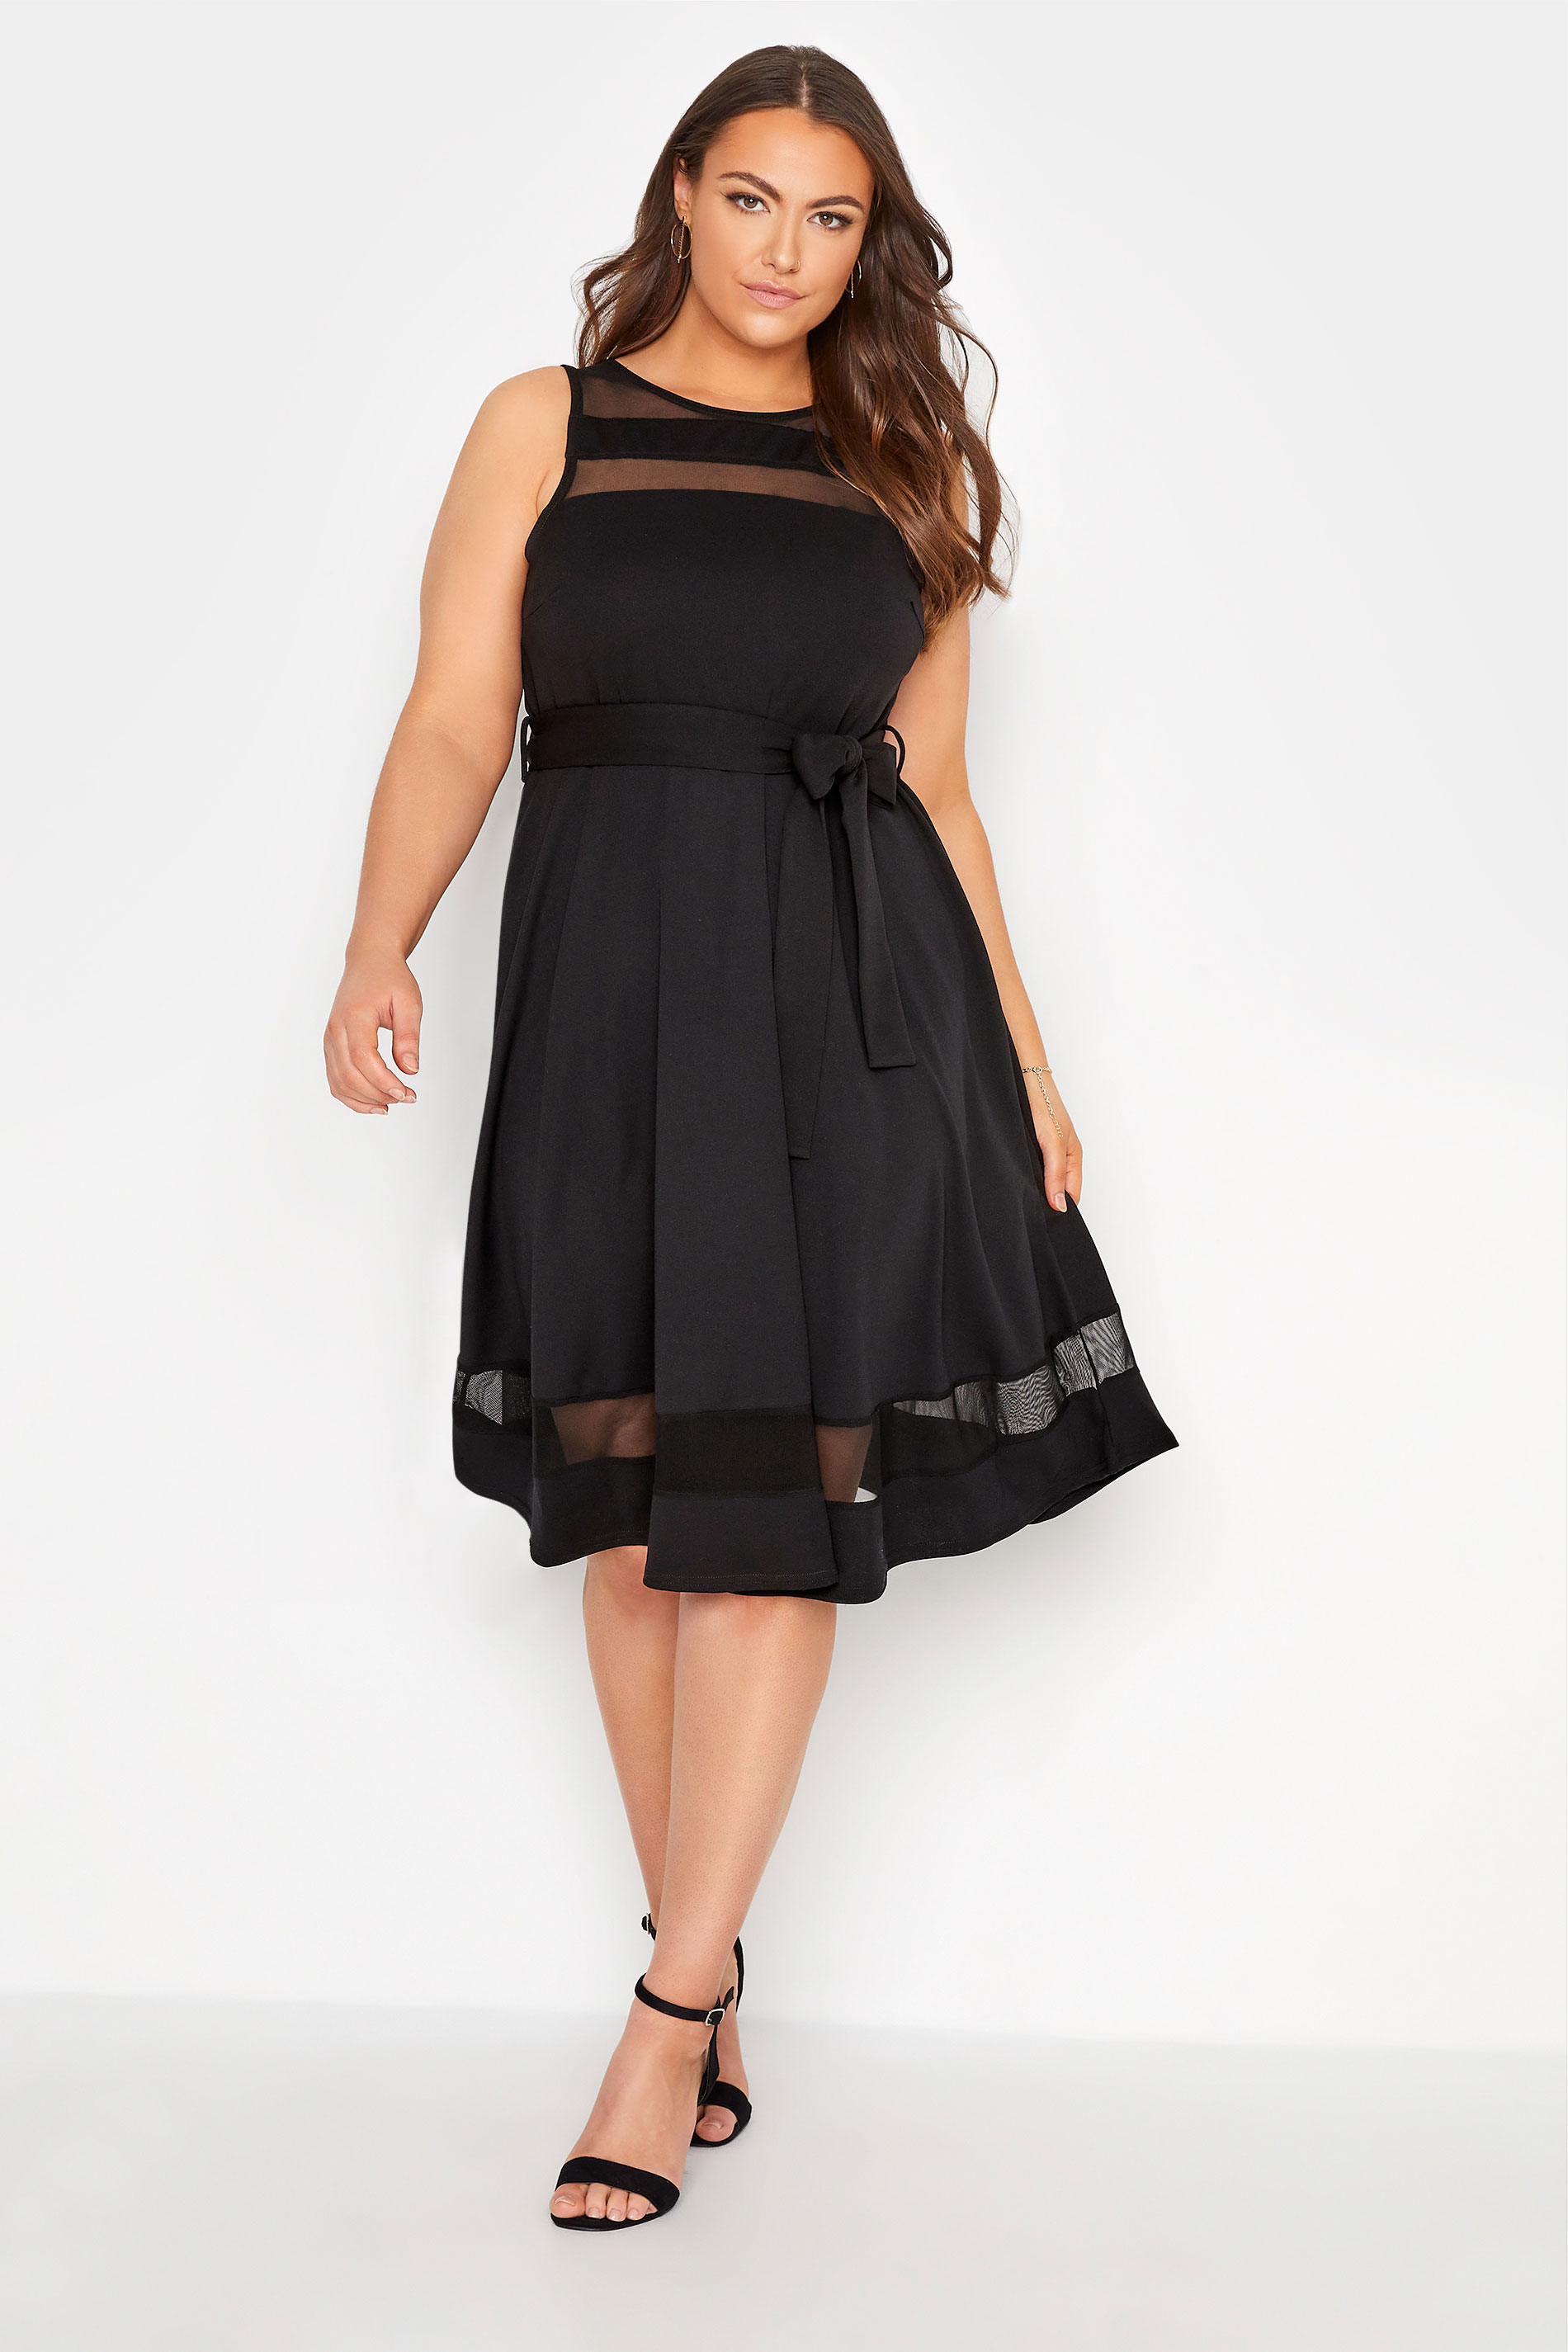 Robes Grande Taille Grande taille  Robes Patineuses | YOURS LONDON - Robe Noire Bandes Filet - CF39869